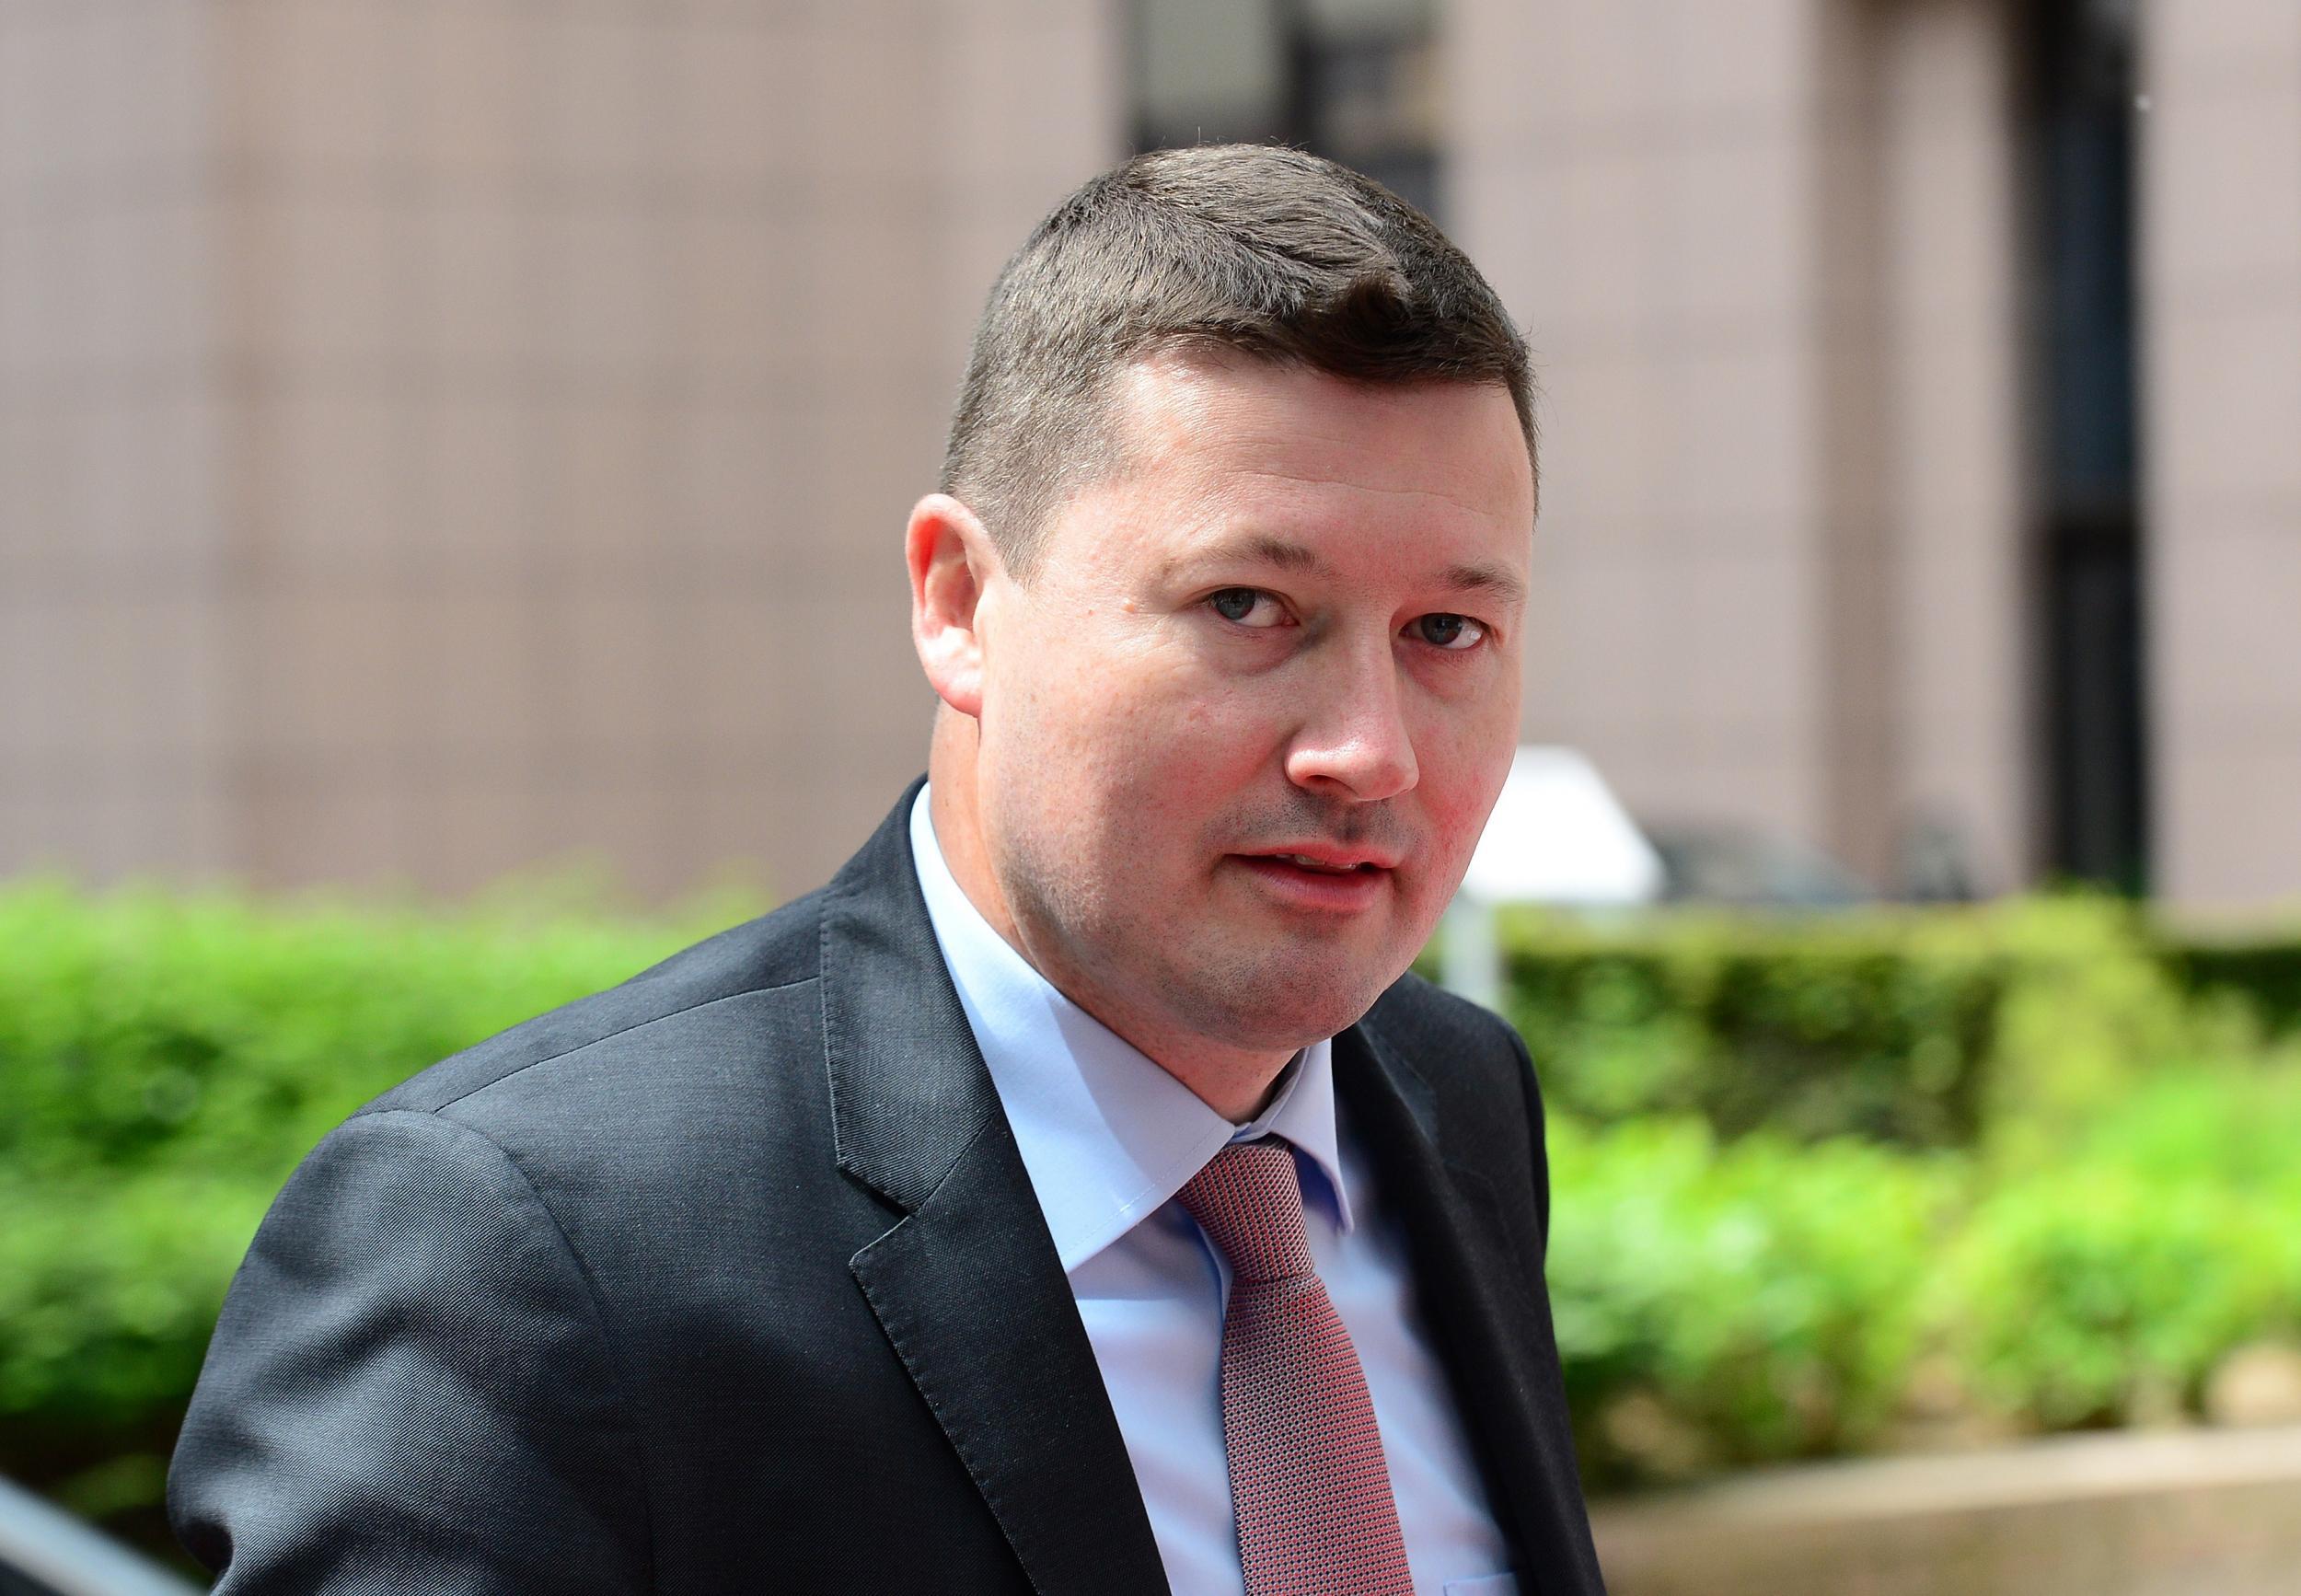 Martin Selmayr, Jean-Claude Juncker’s chief of cabinet, was accused of the leak, but denies it (Getty)